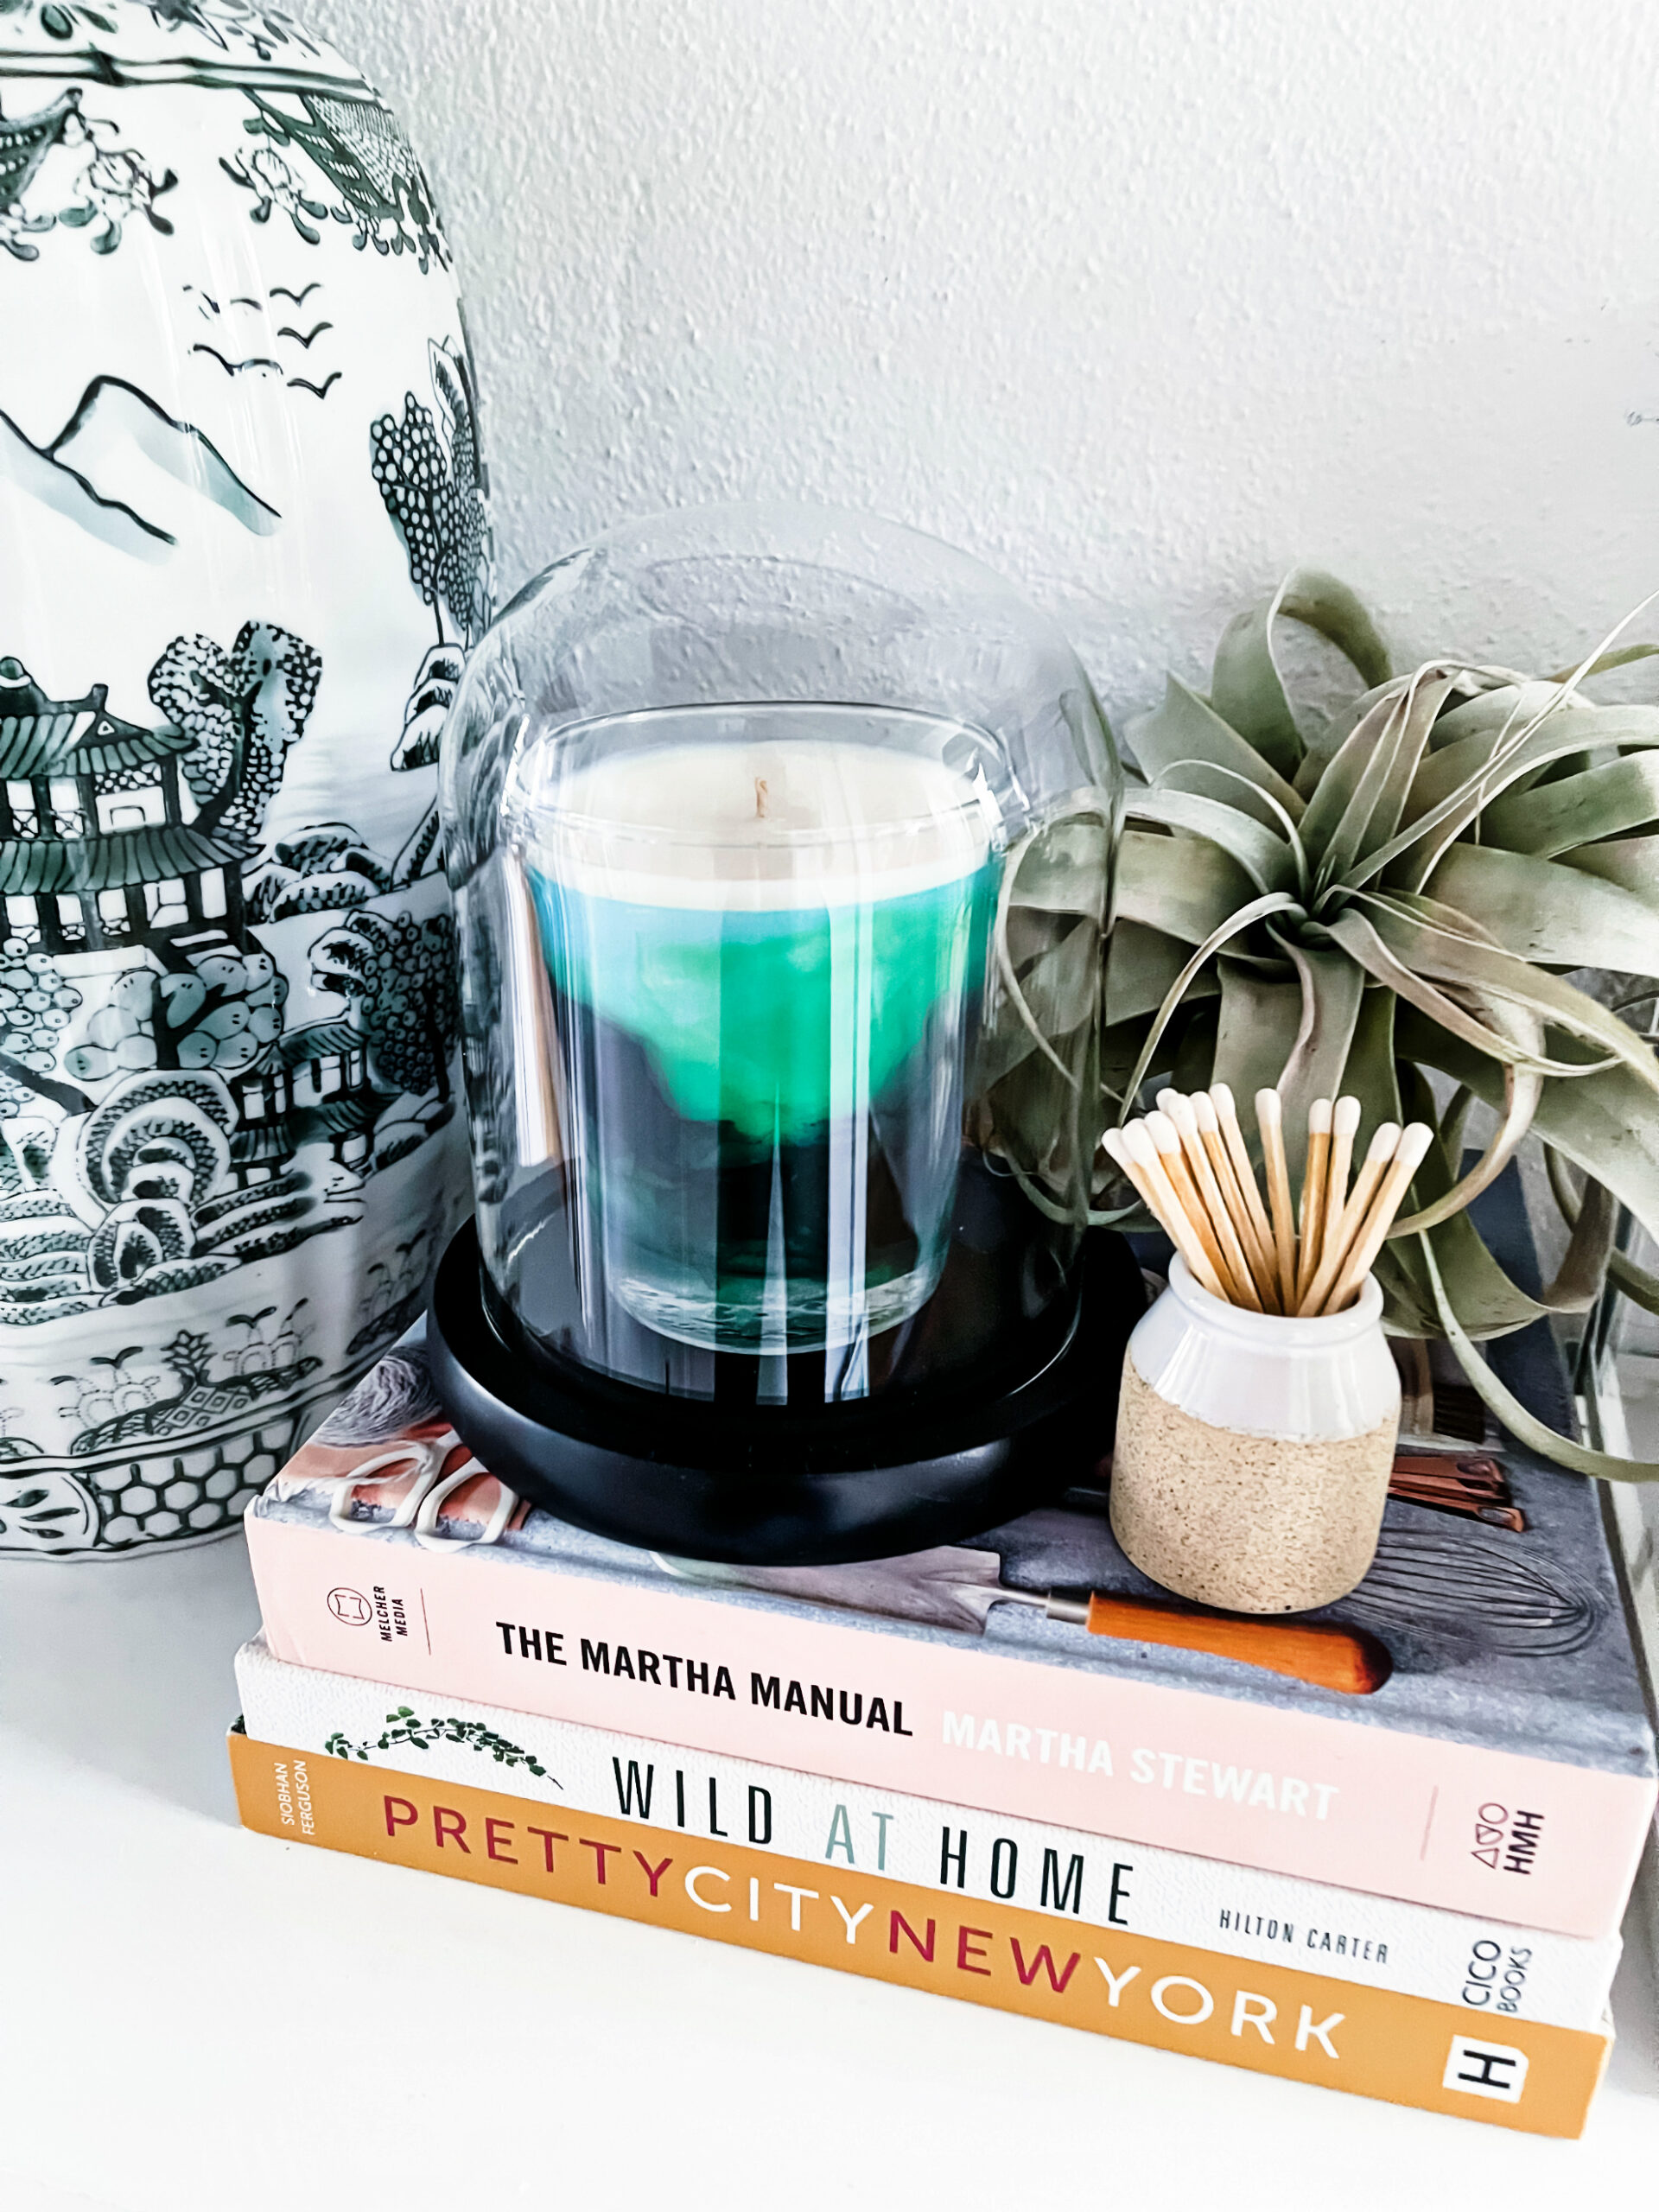 Artistscent Fragrance Candles, Candle Styling In Home, Candle Decor, Elizabeth Karlson, Evergreen Shore Candle, Glass Photophore